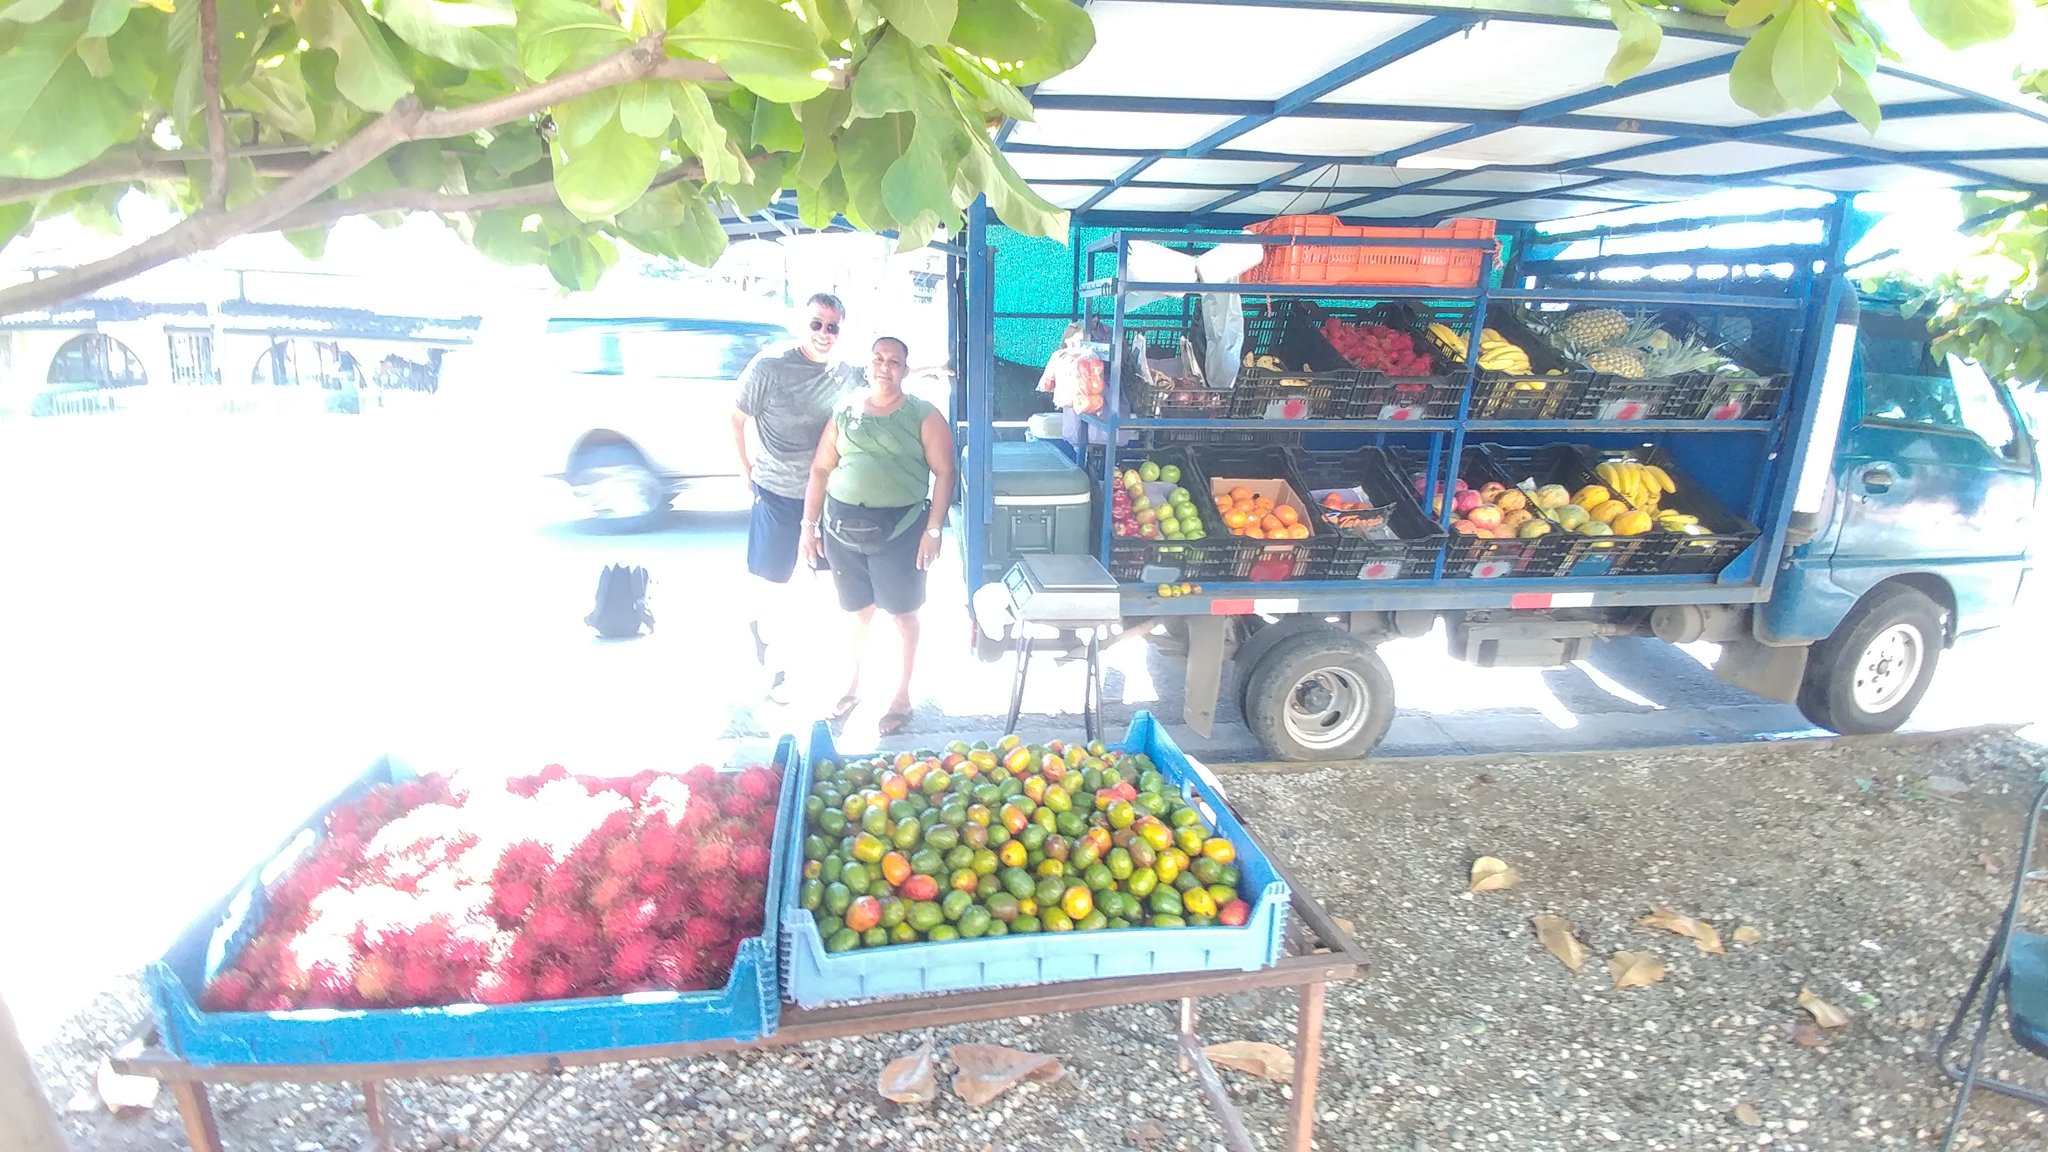 Chef Eddie G Tamarindo Costa Rica Great Food Truck Race Fruit Truck Fresh Local Fruit Locavore Greatfoodtruckrace Chefeddieg Foodnetwork Tamarindo Cr Newenglandgrill T Co Xooffx1fd2 T Co A18qetfqs9